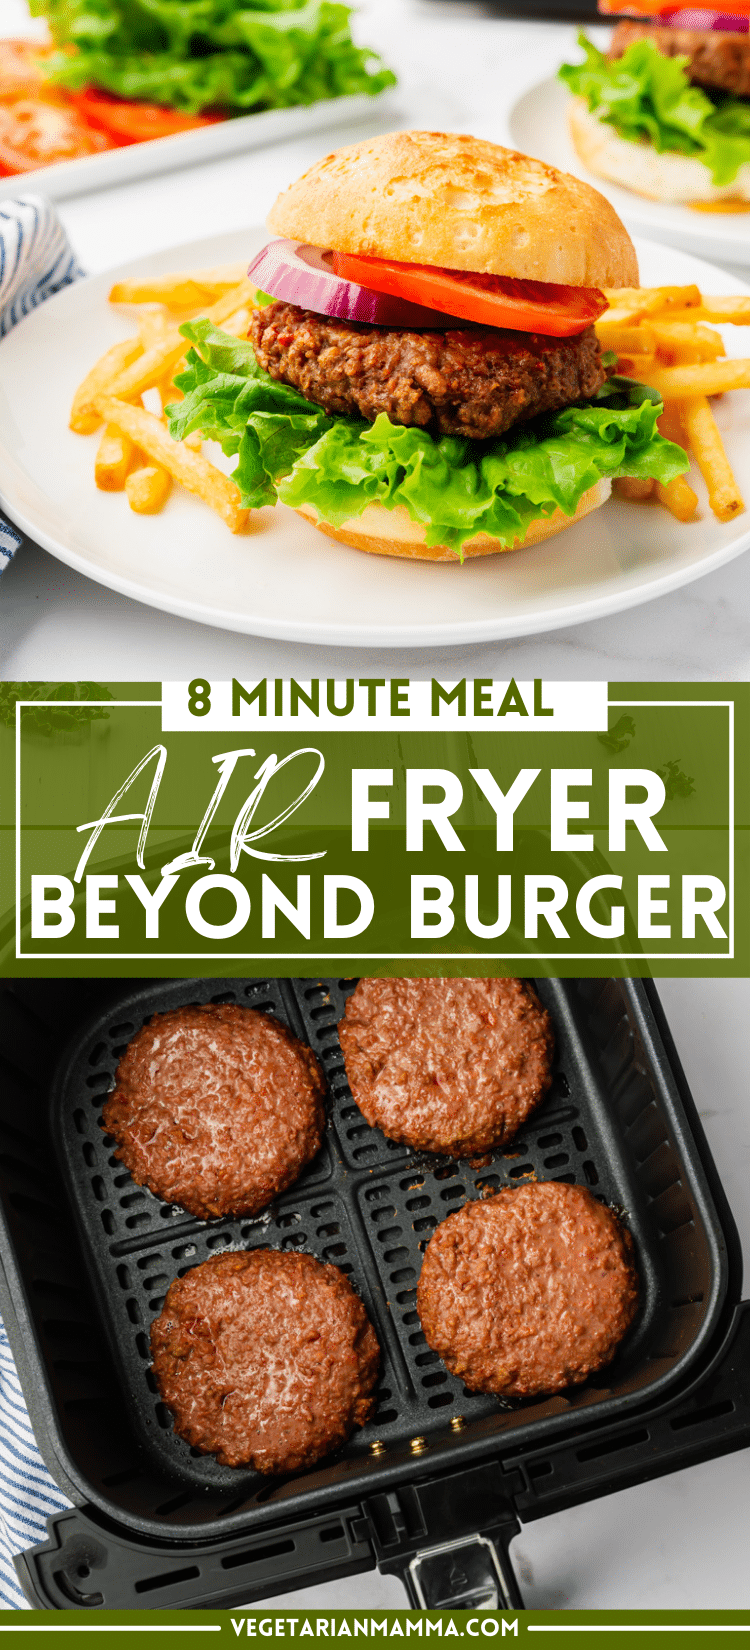 Wondering how to cook a beyond burger in the air fryer? Read on and we will teach you all the trips and trick you need to make a beyond burger air fryer!